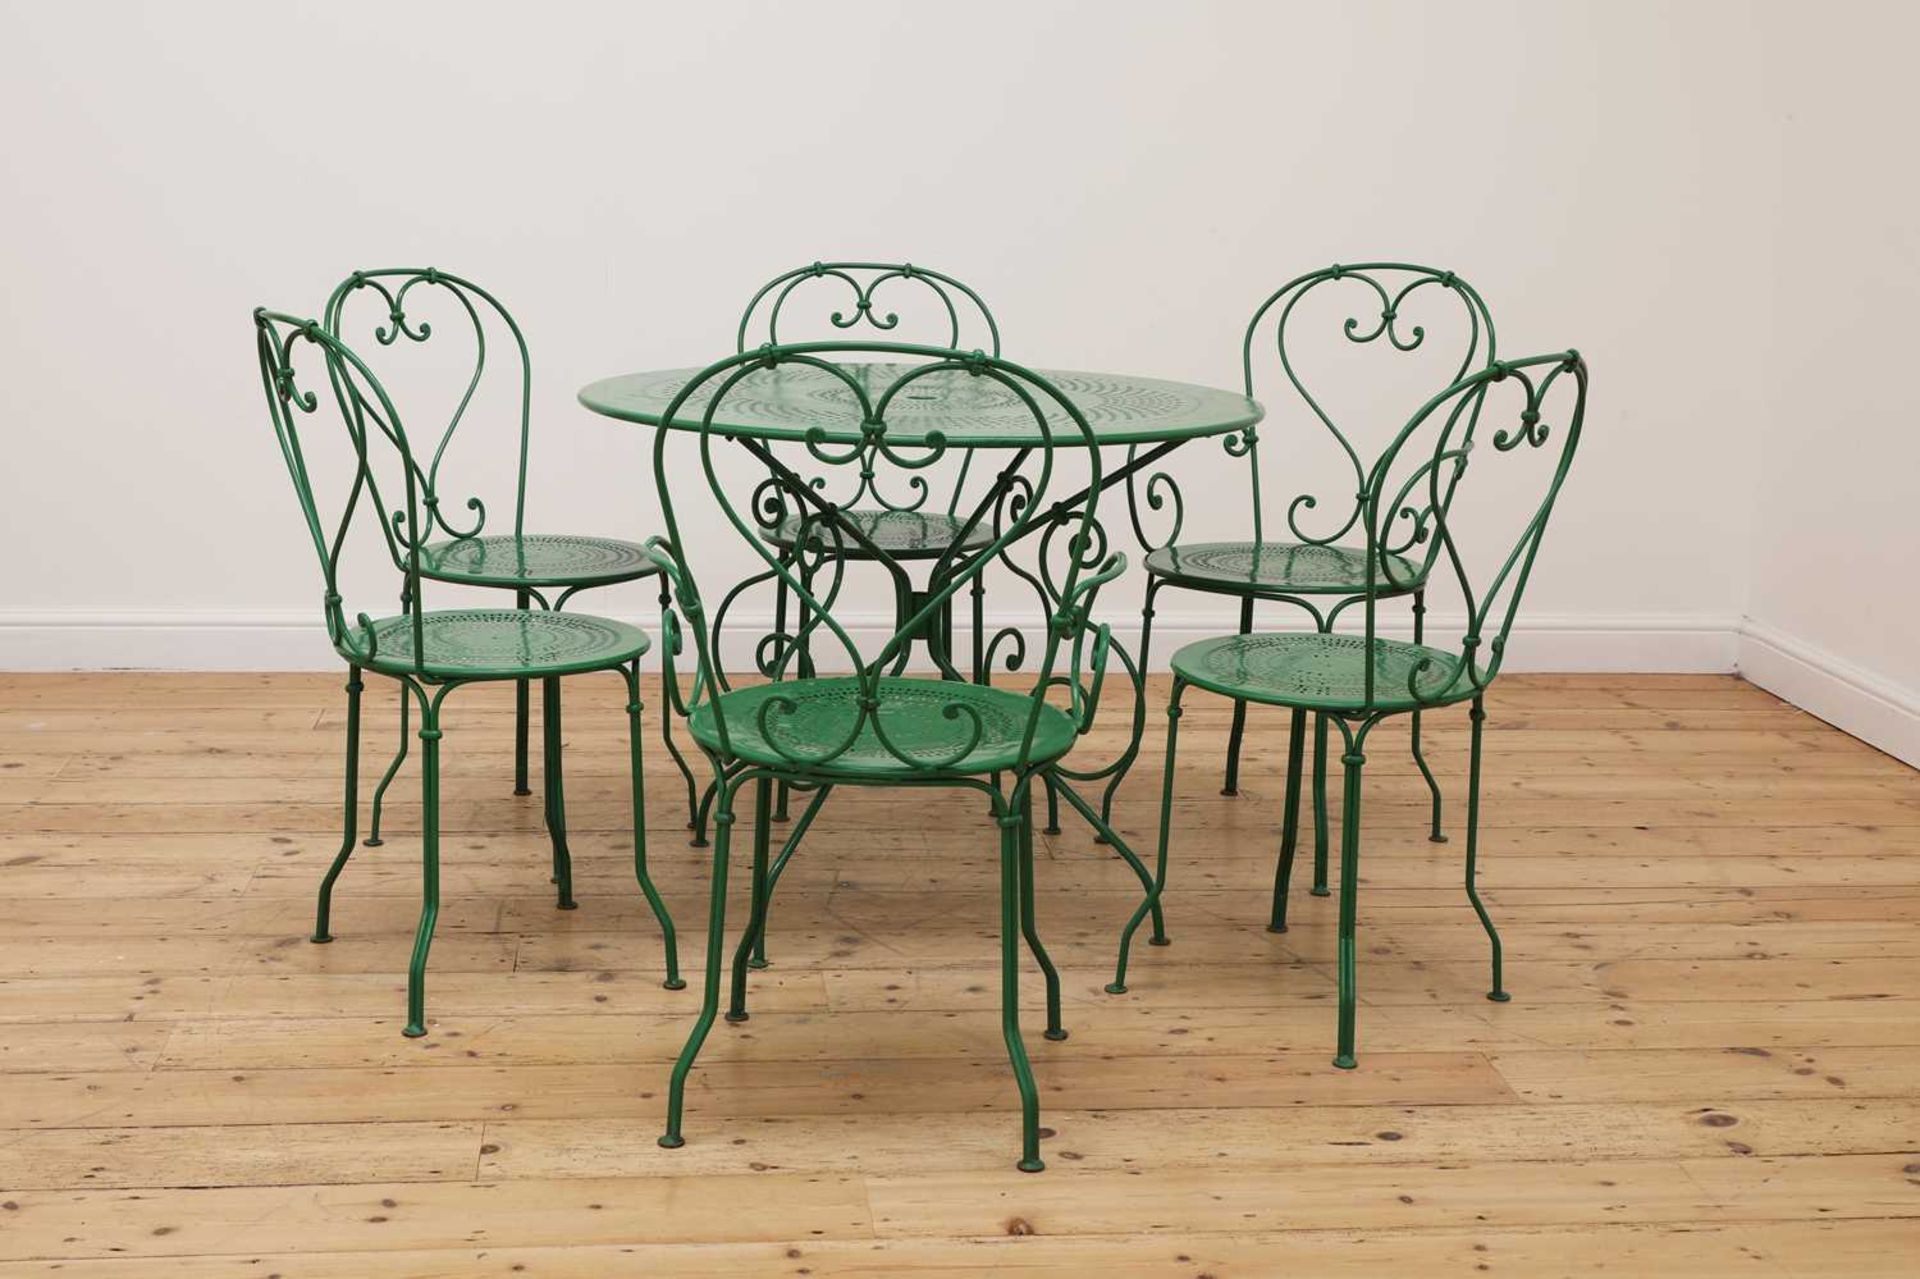 A green-painted aluminium garden table, - Image 2 of 4